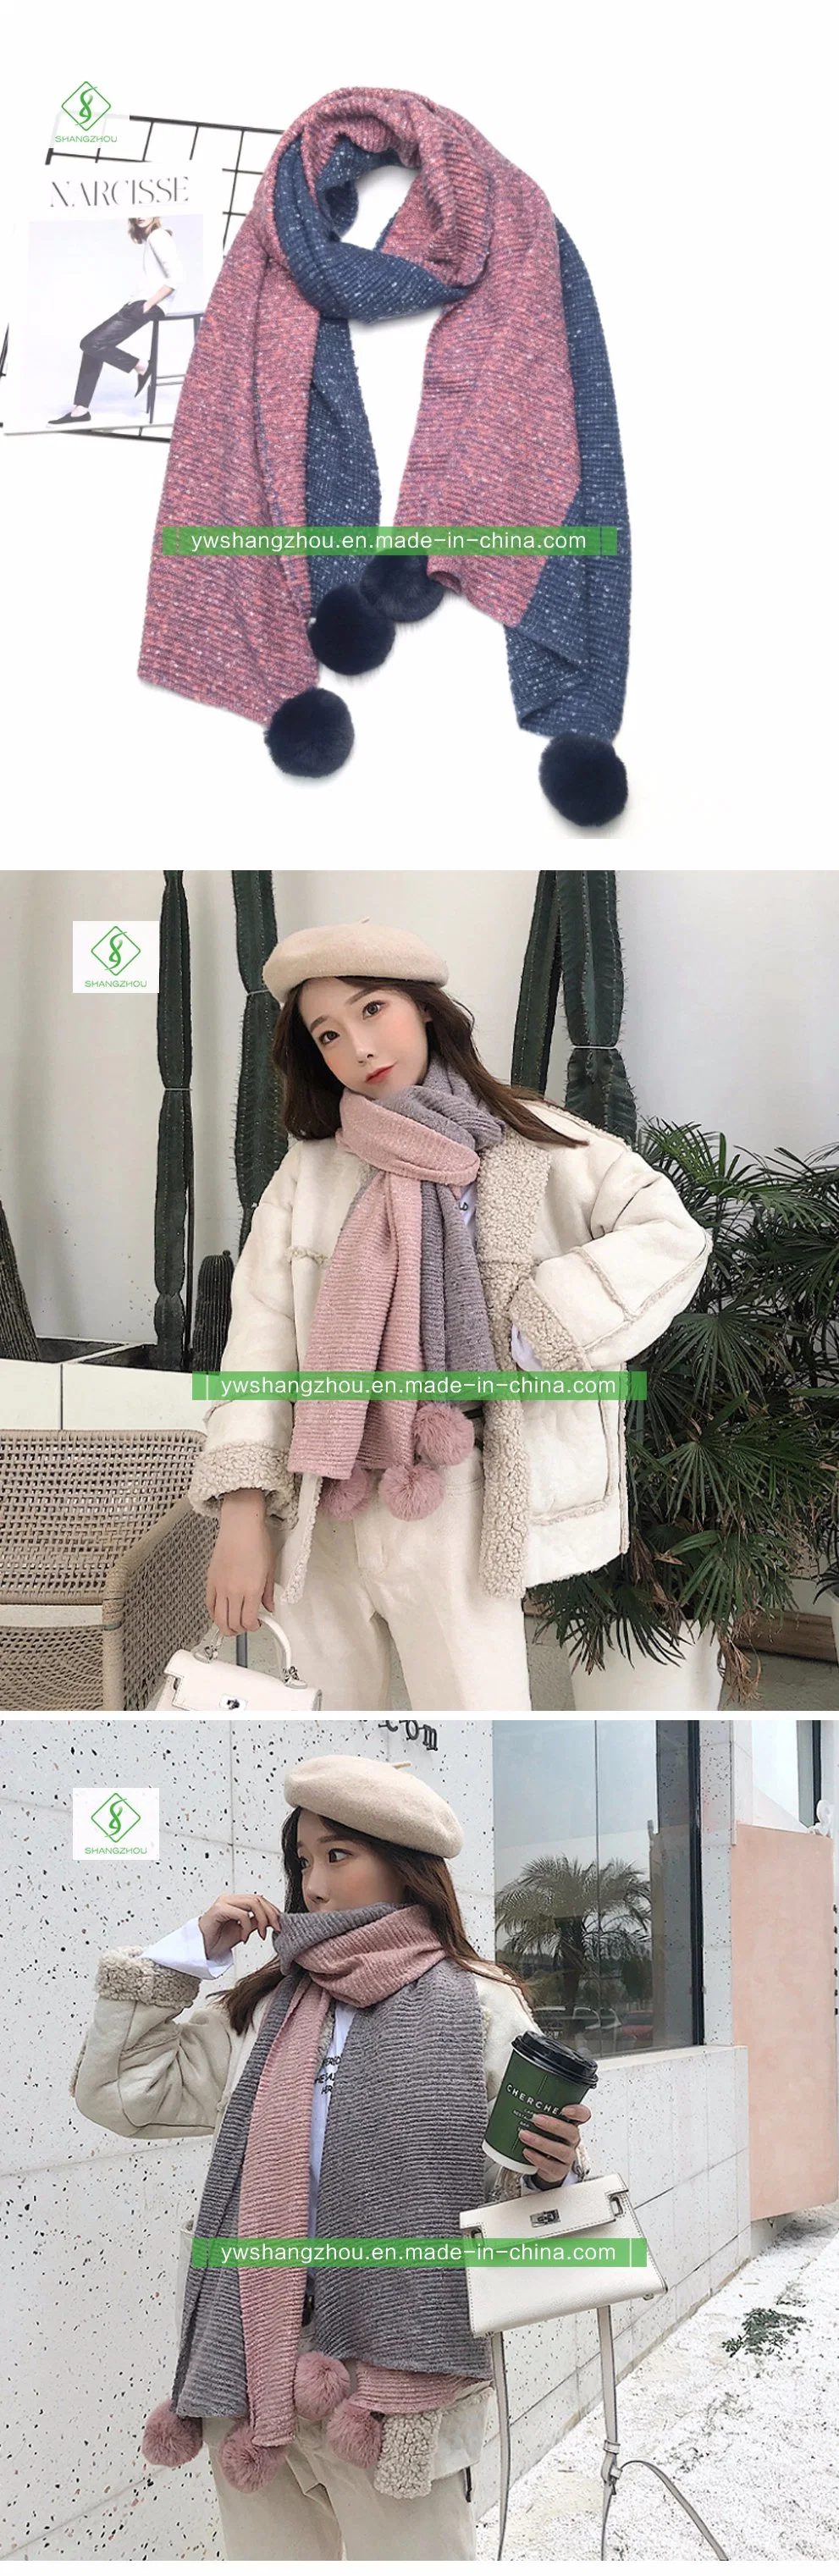 Contrast-Color Cashmere Scarf with Wool Ball Warm Fashion Soft Lady Shawl